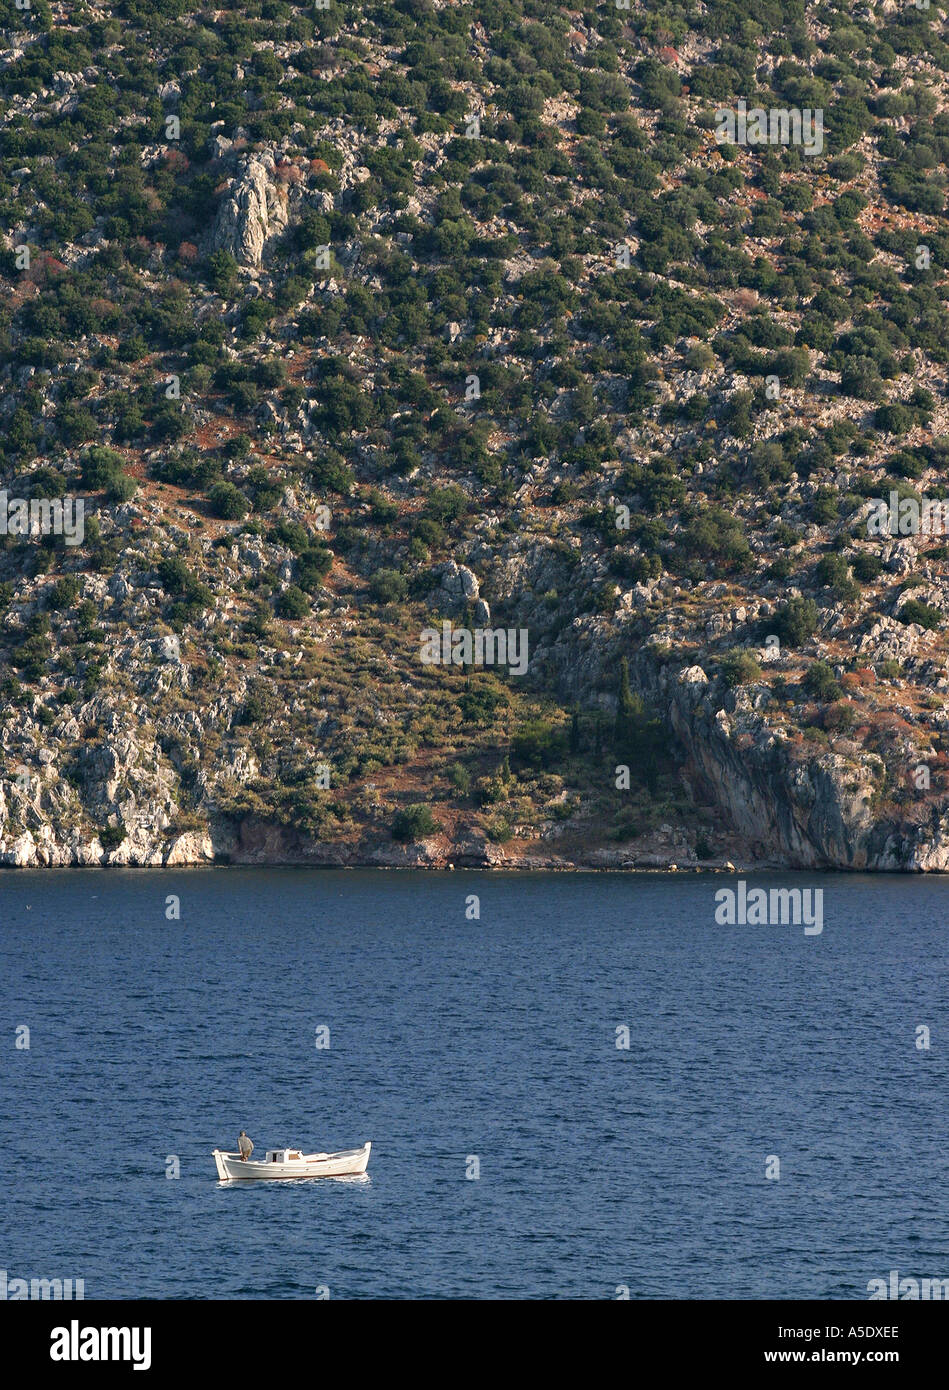 Lone fisherman in a white boat on blue waters against a scrubby hillside in the background Tolo Peloponese Greece Stock Photo